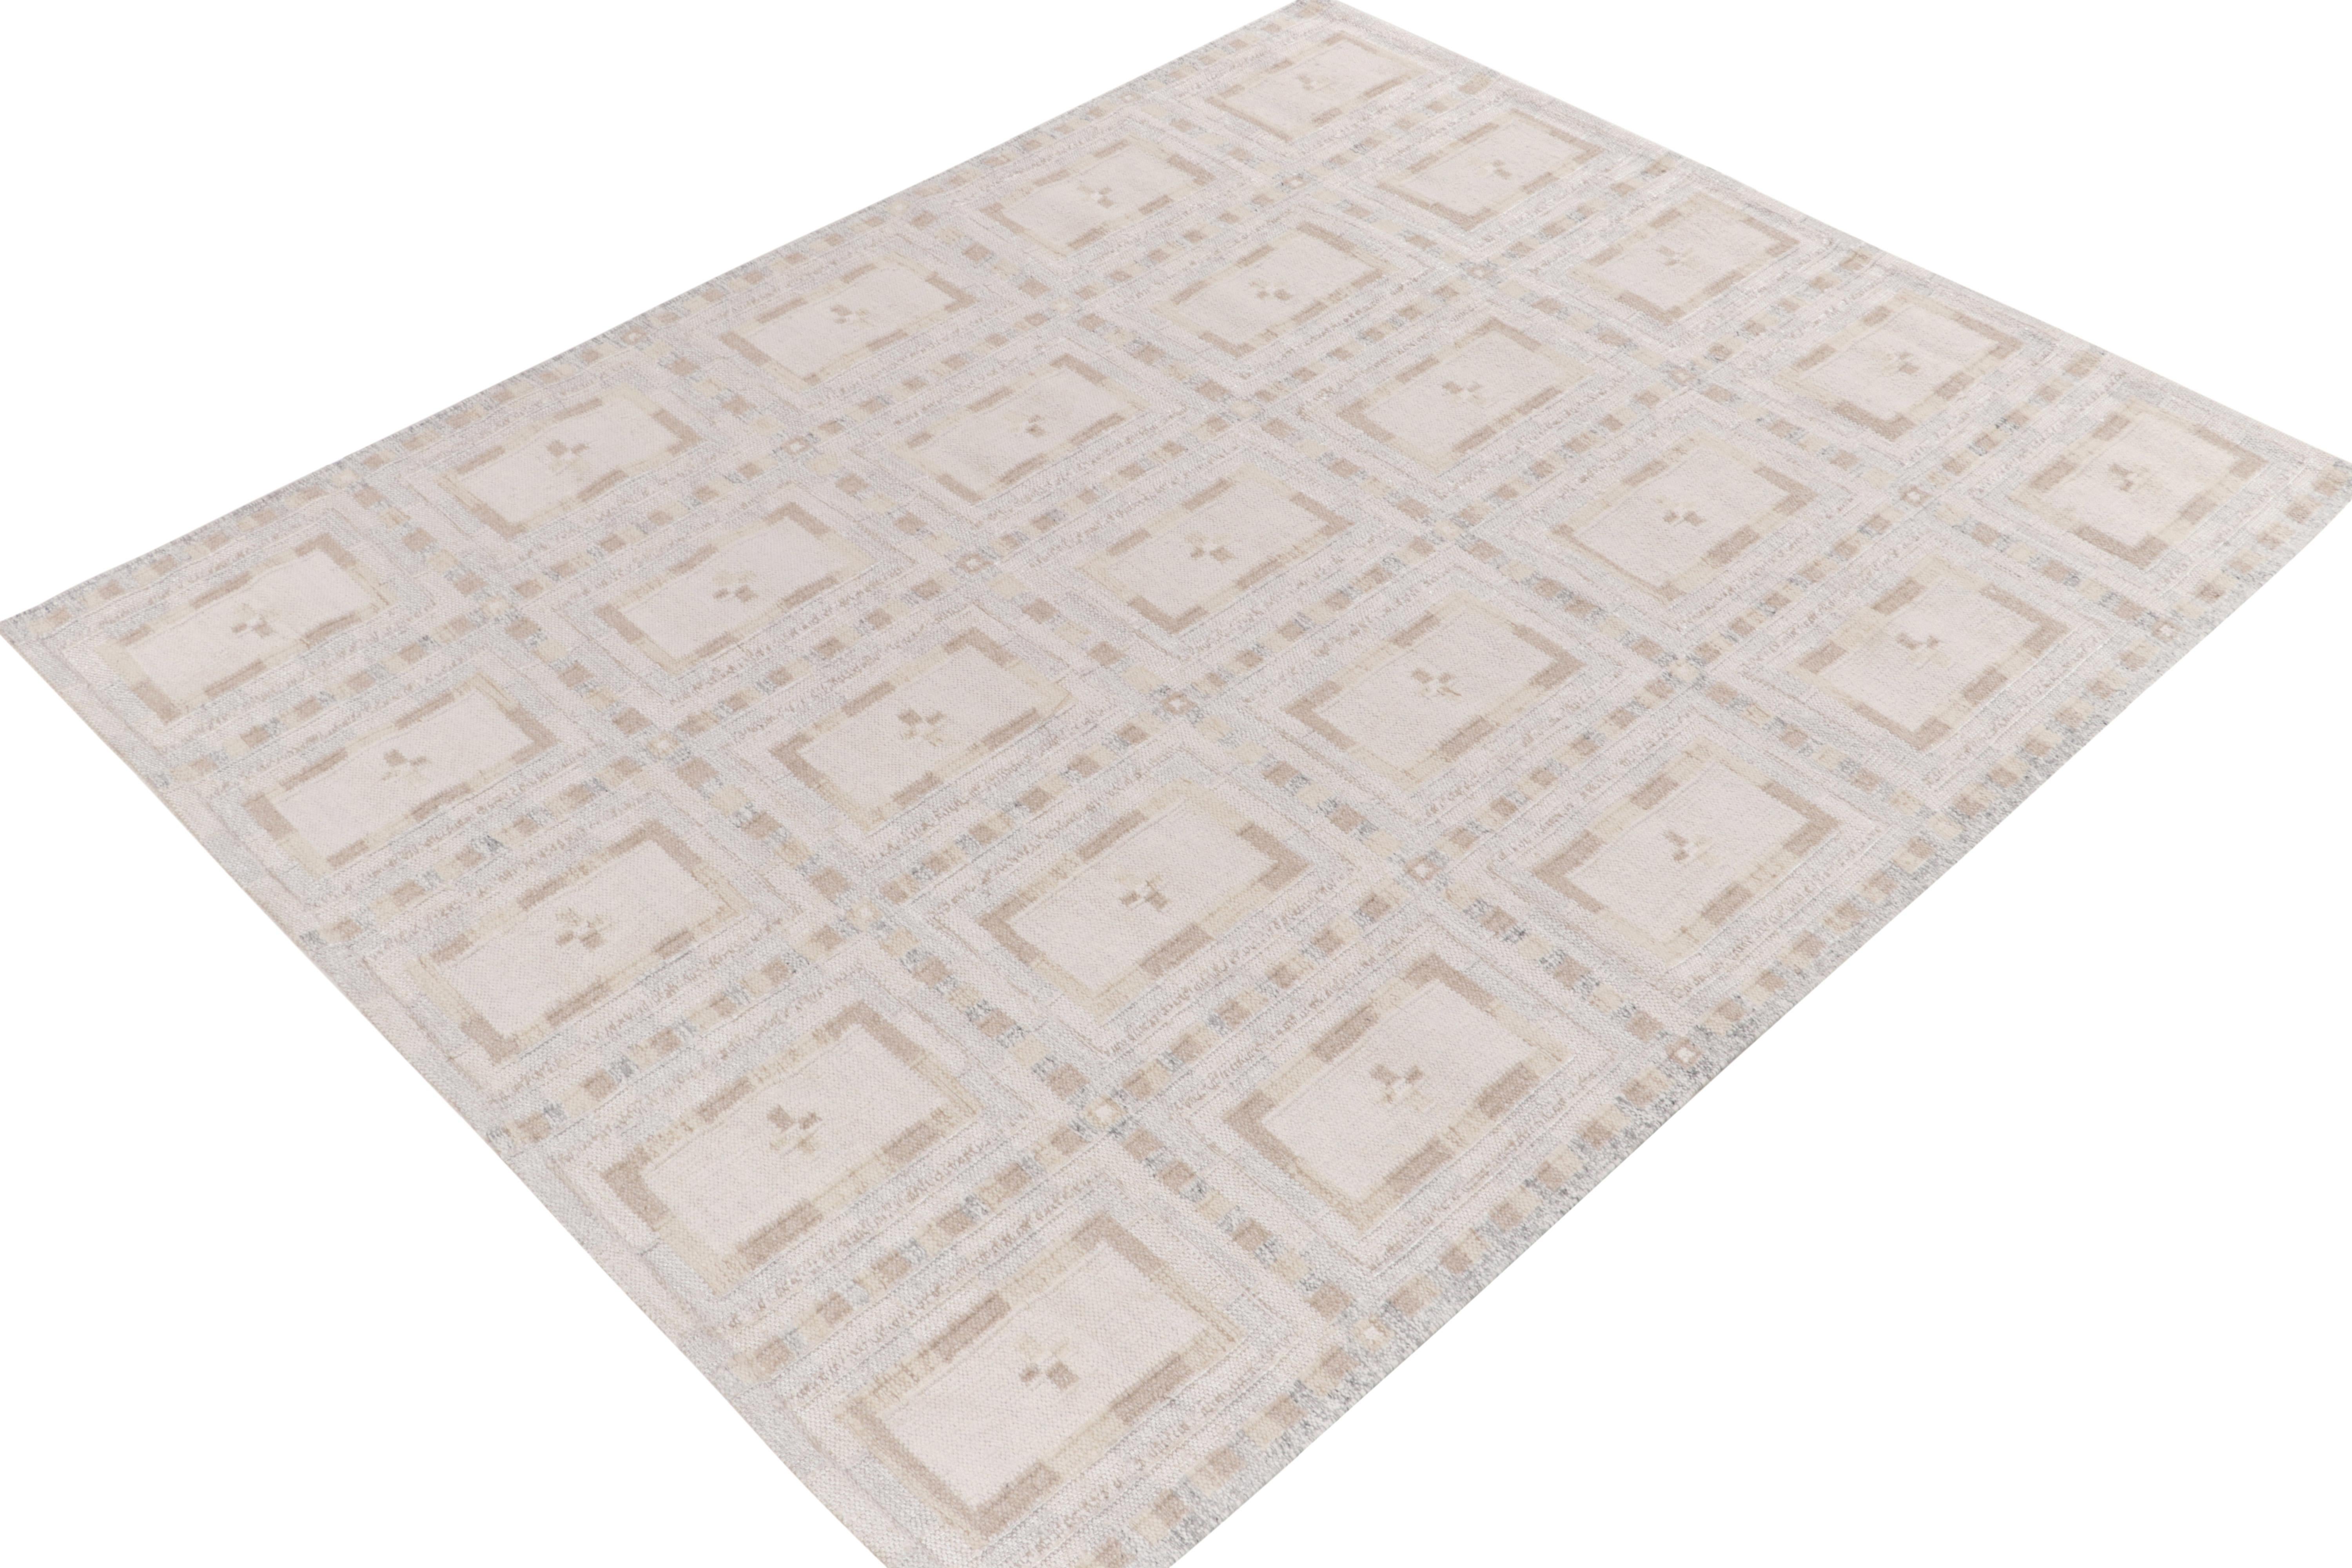 A 6x9 Swedish style kilim rug from our award-winning Scandinavian flat weave selections. The piece showcases a sophisticated play of beige & brown with gray blue for an intricate, yet cool accent to the white hues. Connoisseurs may note this